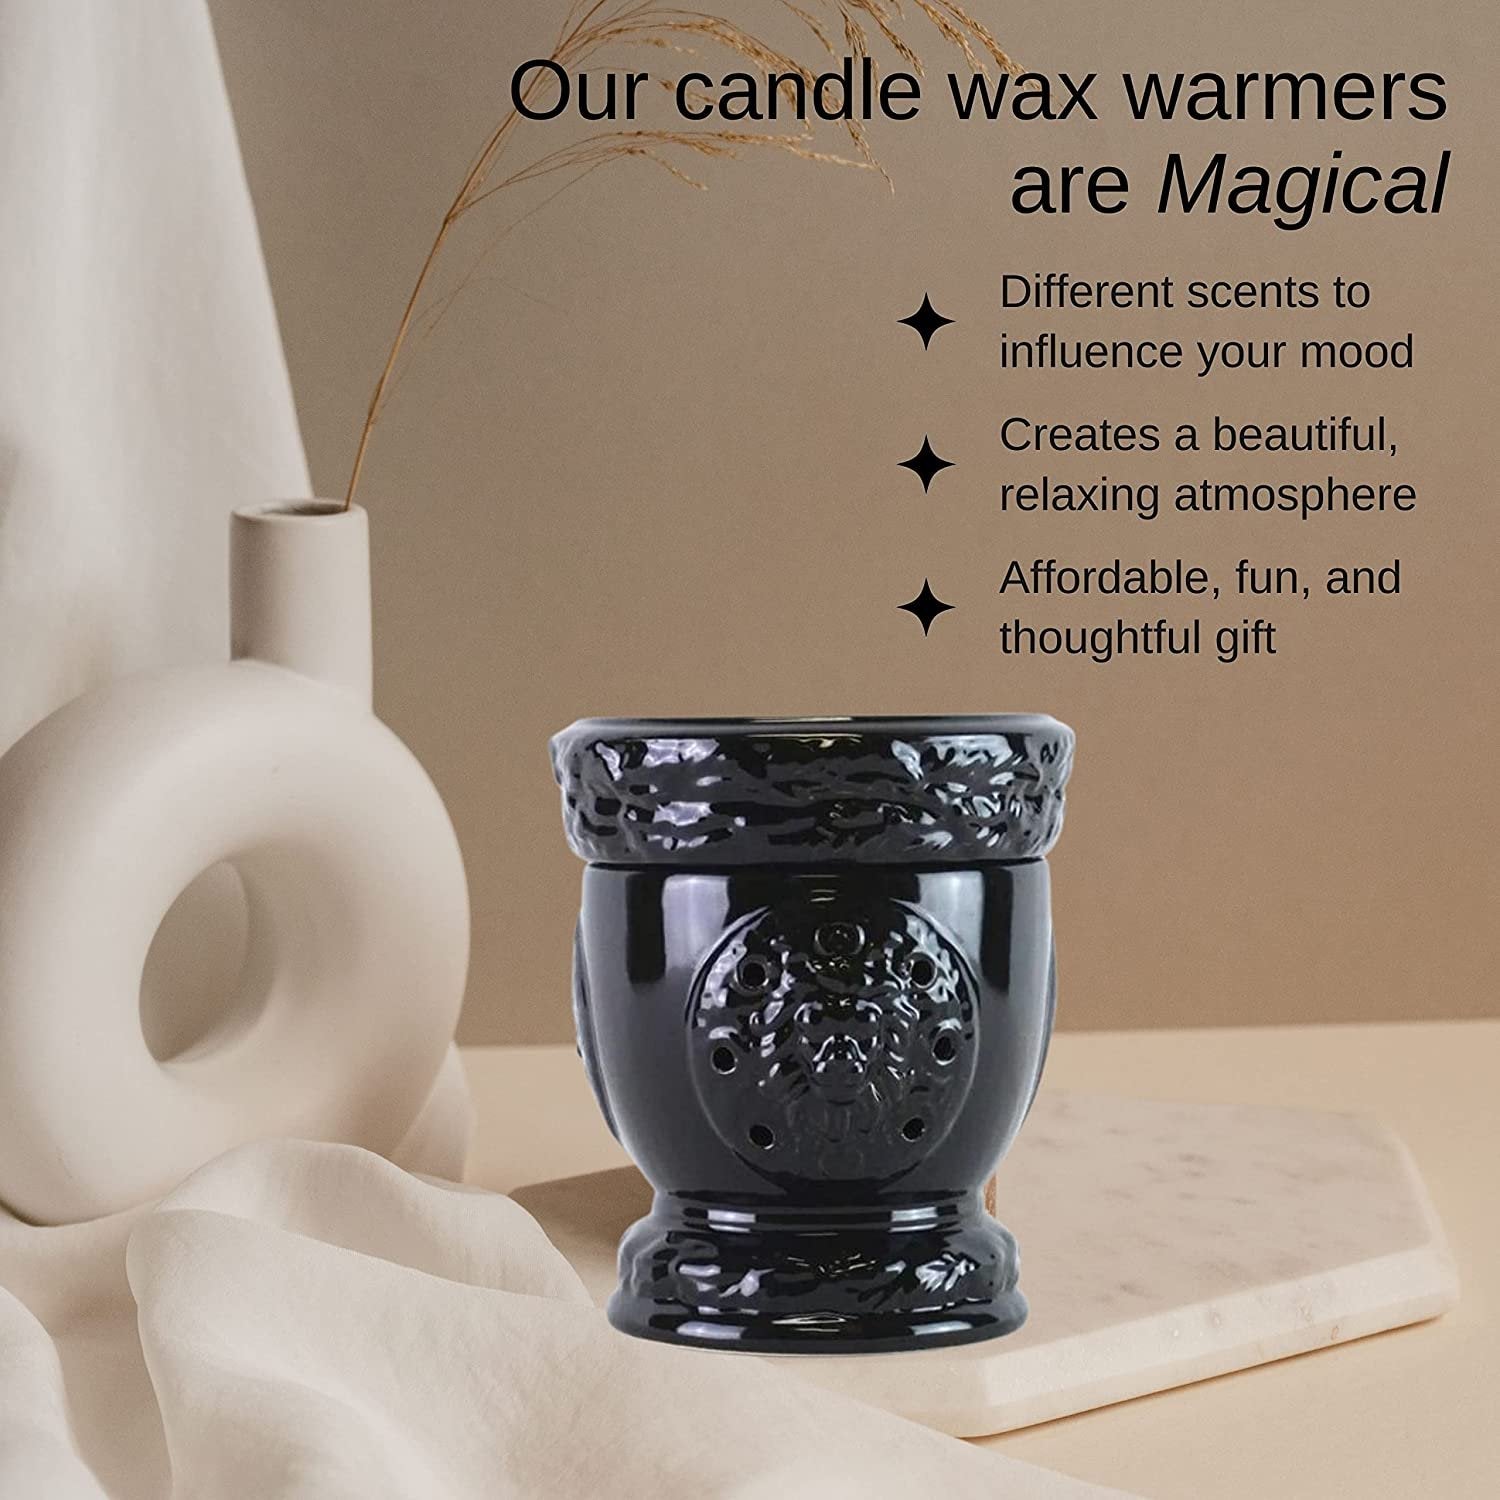 Tyler Candle Company Lionesque Gloss Black Fragrance Wax Warmer - Candle Wax Melt Warmer - Home Decor Candle Accessories with Included 6 Diva Scent Wax Melts - 5.5 x 5" in with Bonus Key Chain